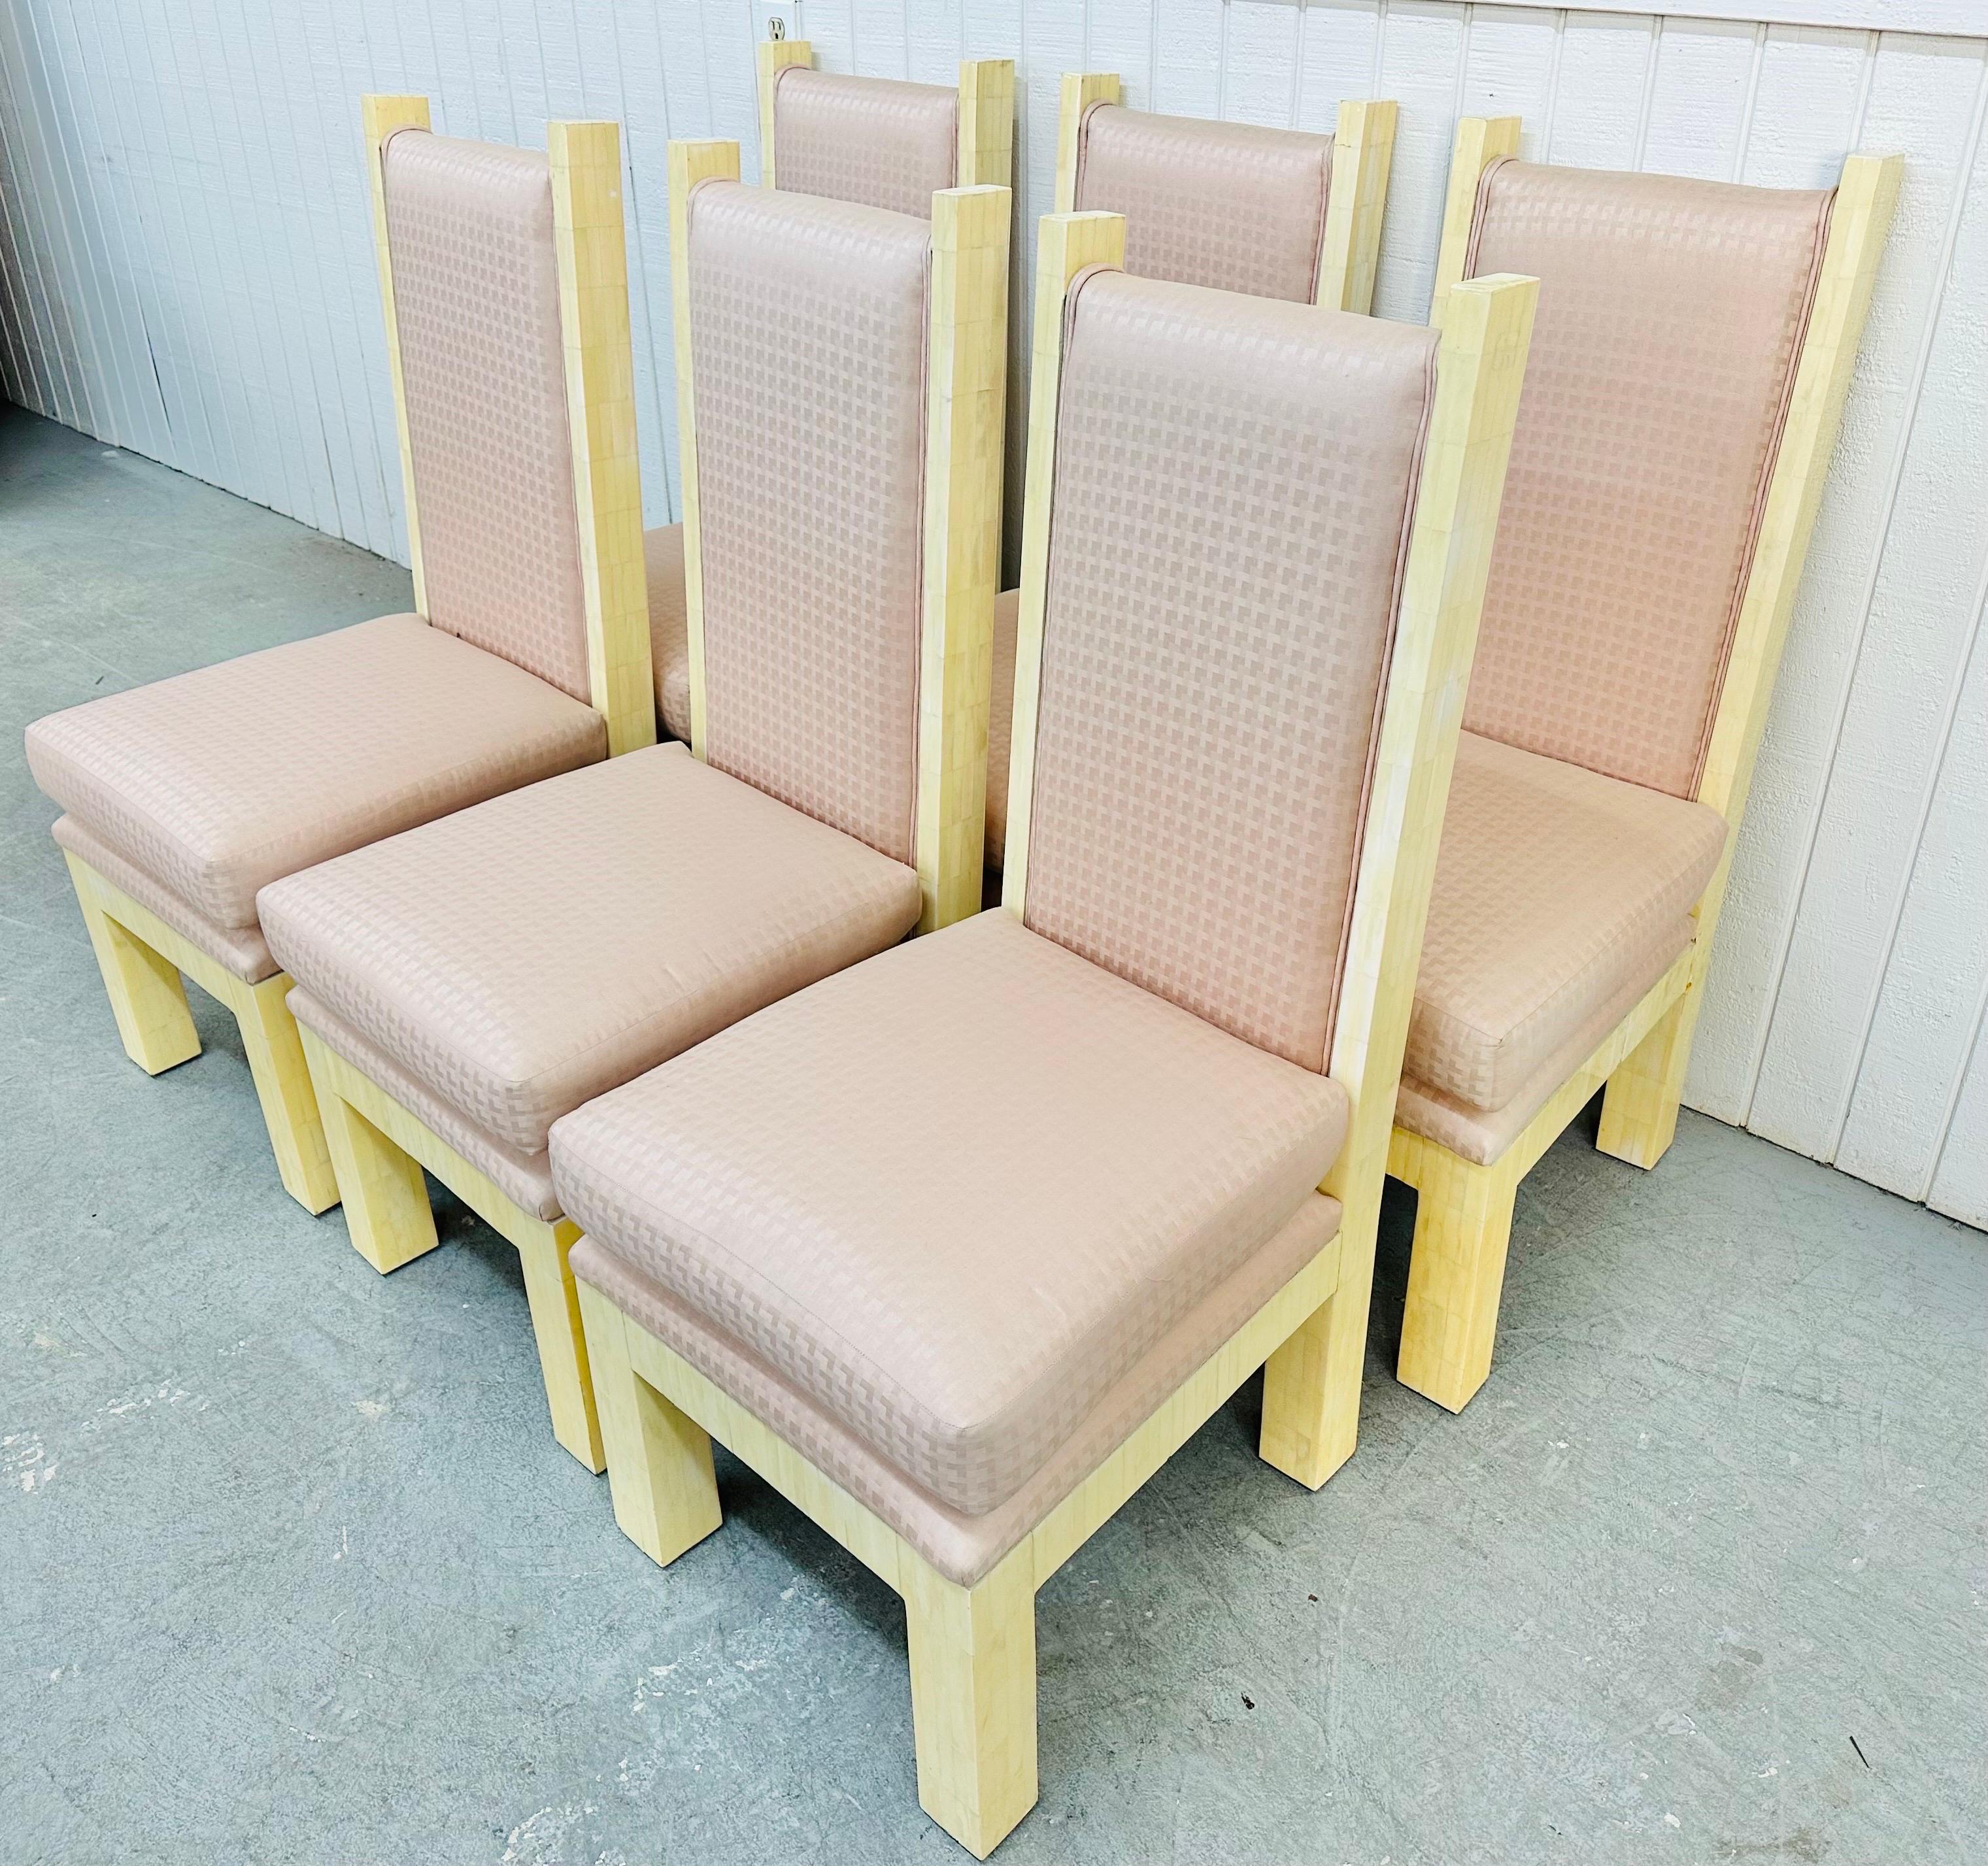 This listing is for a set of Vintage Modern Enrique Garcel Tessellated Dining Chairs. Featuring a straight line design, tessellated frames, and original pink upholstery. This is an exceptional combination of quality and design by Enrique Garcel!